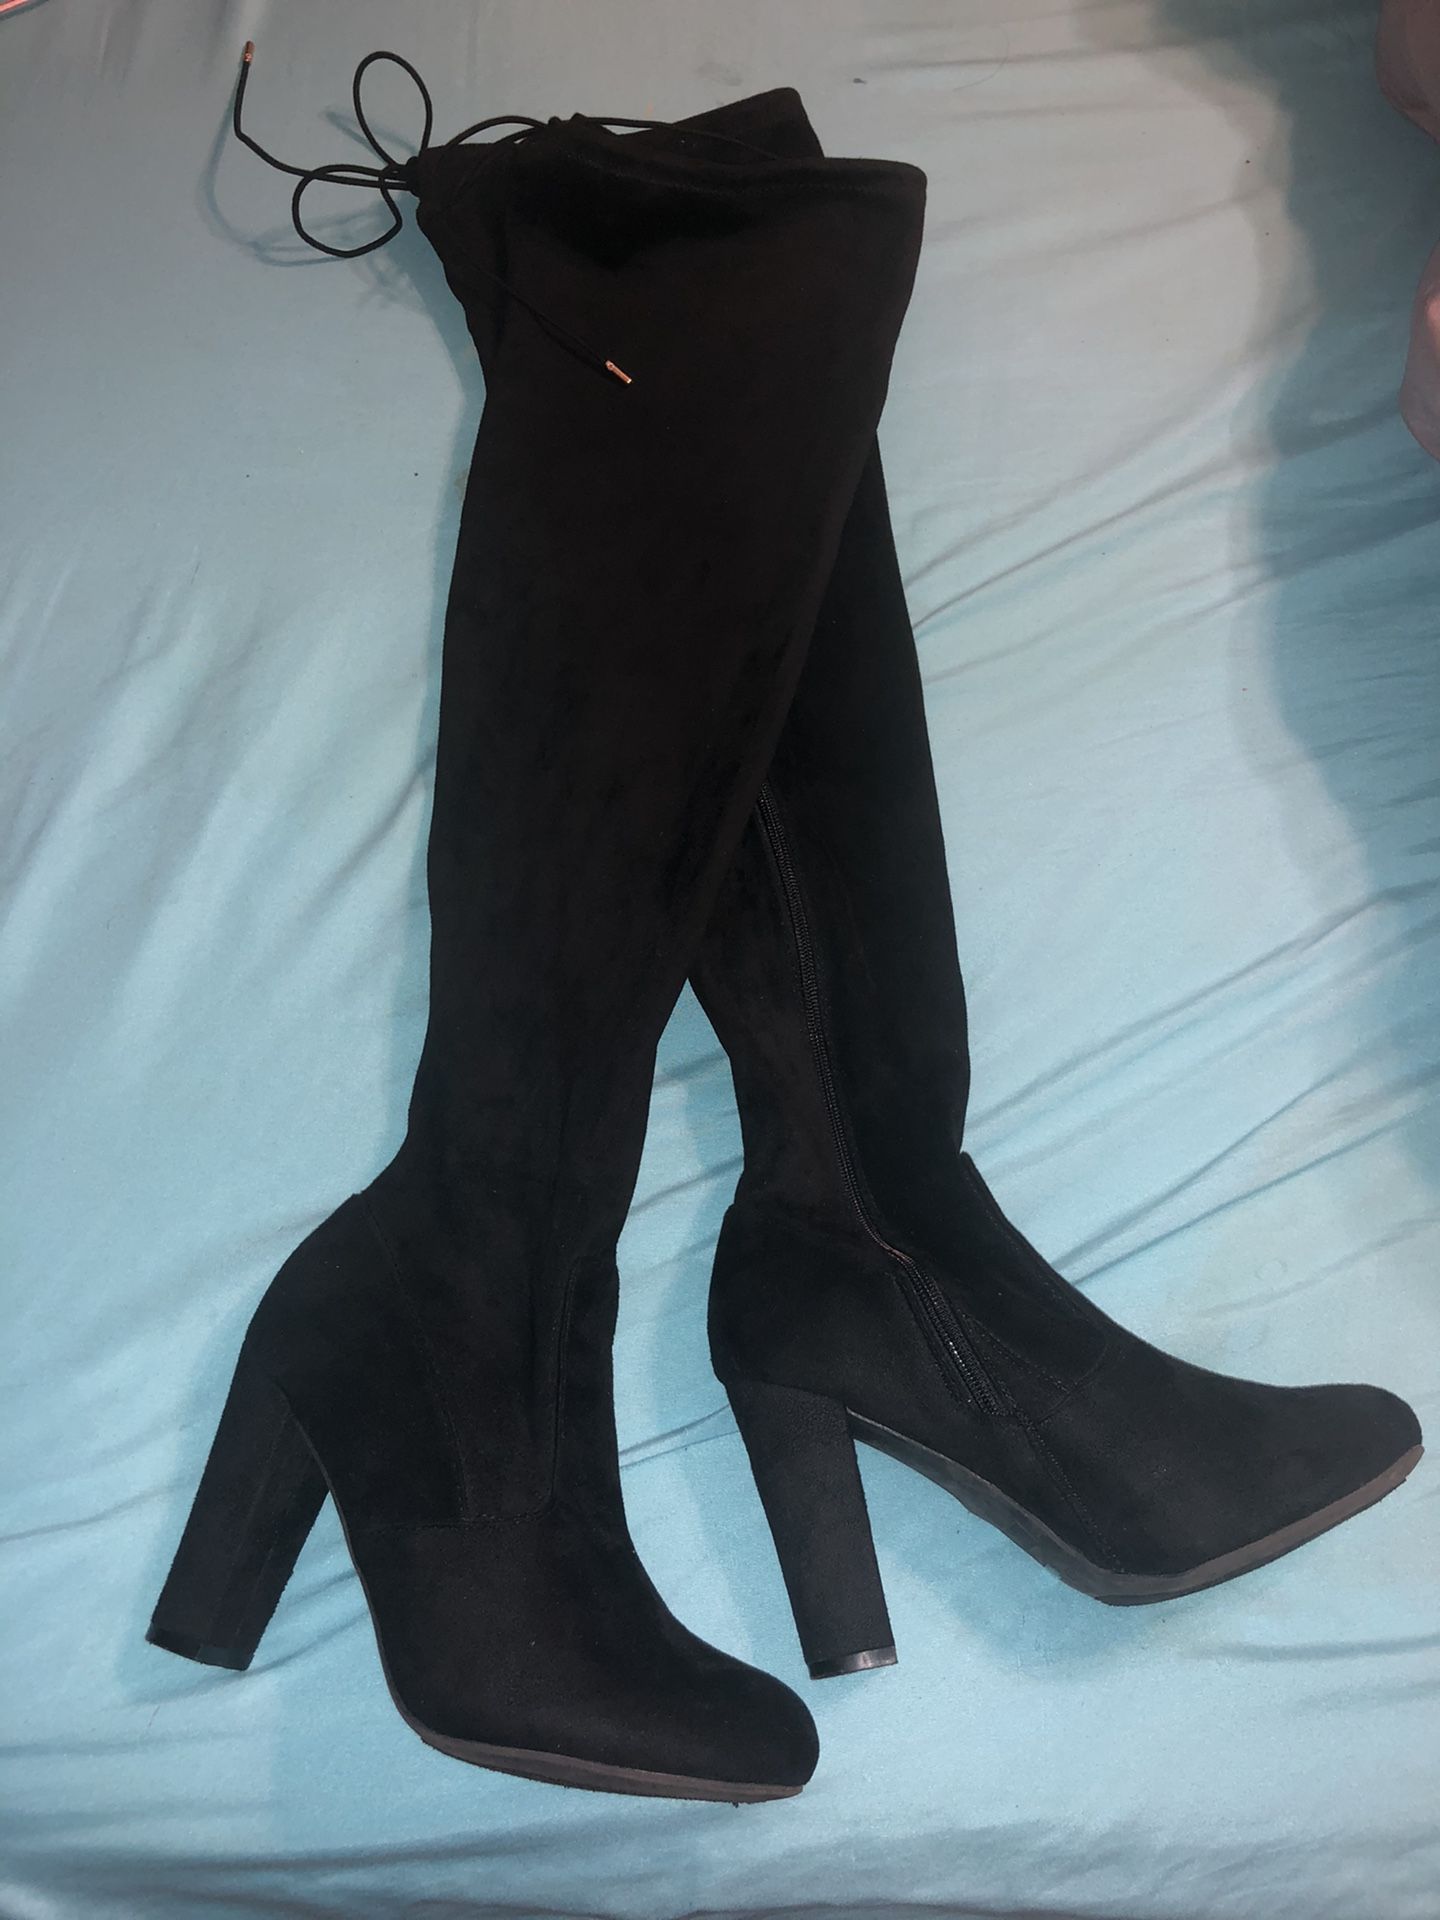 Black Thigh length Boots Size 8 1/2